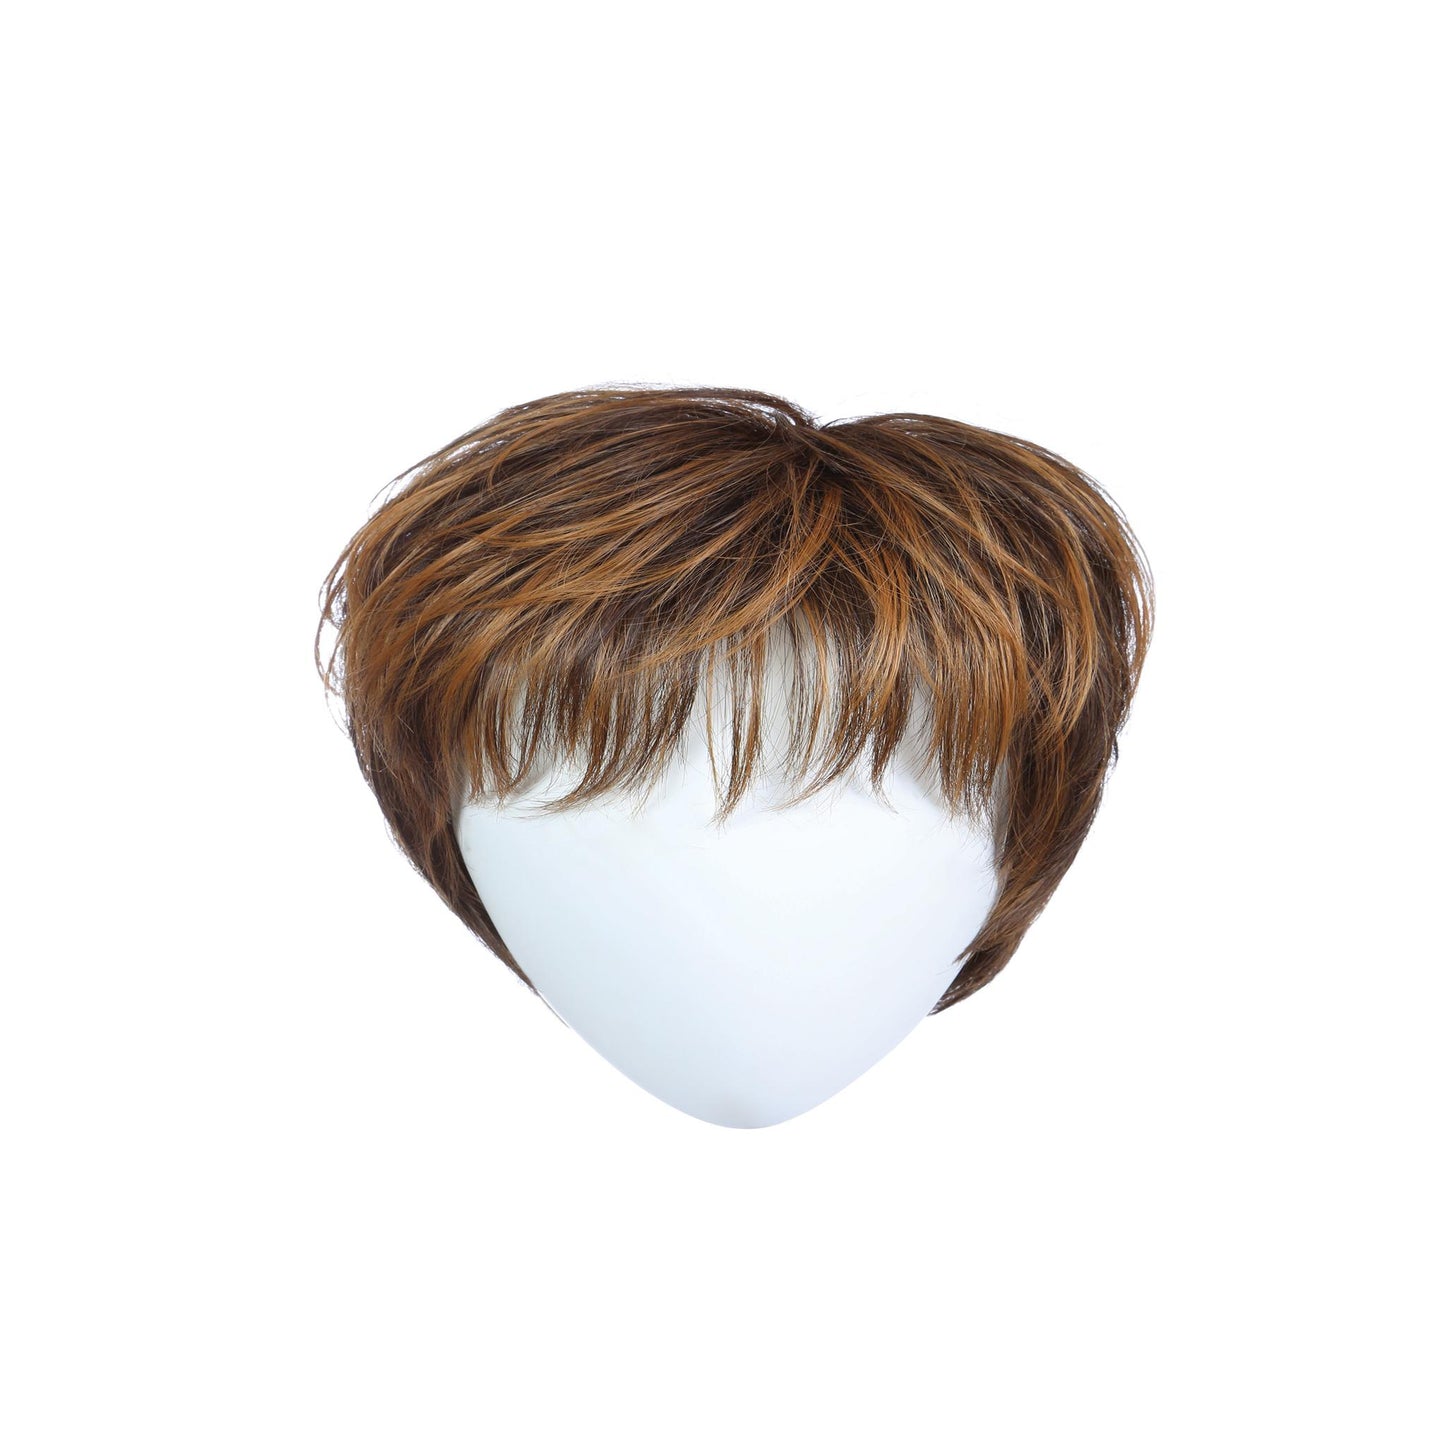 ENCHANT a Heat Friendly Defiant Extended Nape Synthetic Wig by Raquel Welch